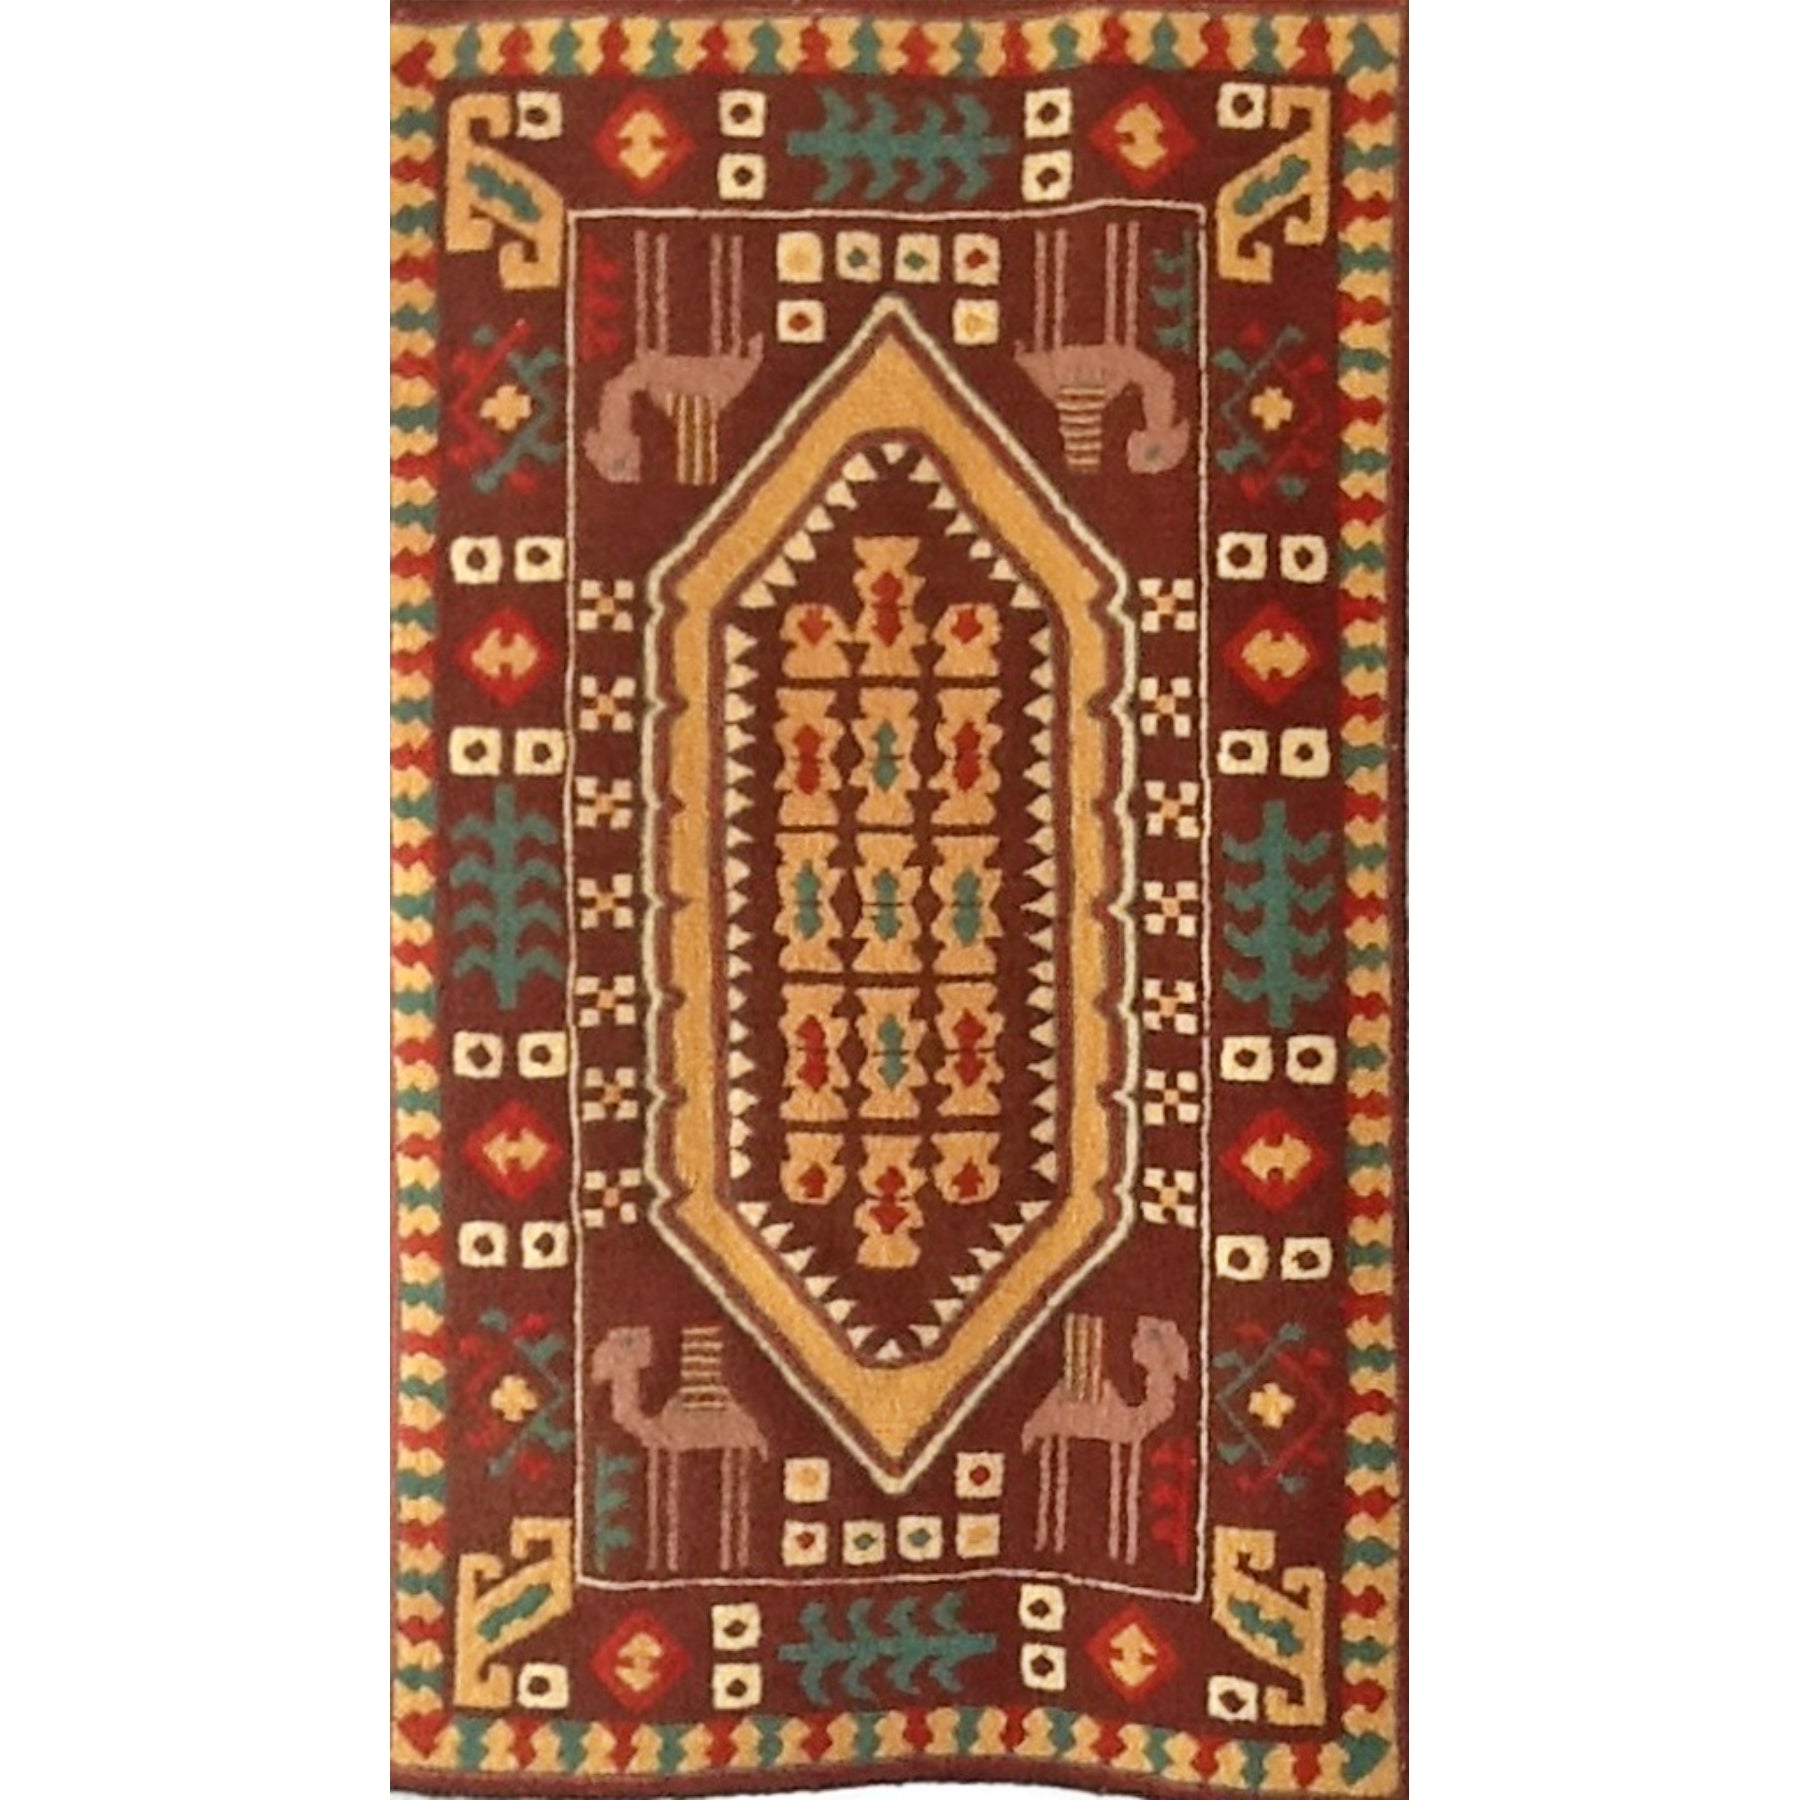 Chahar Mahal, rug hooked by Dorothy Brown